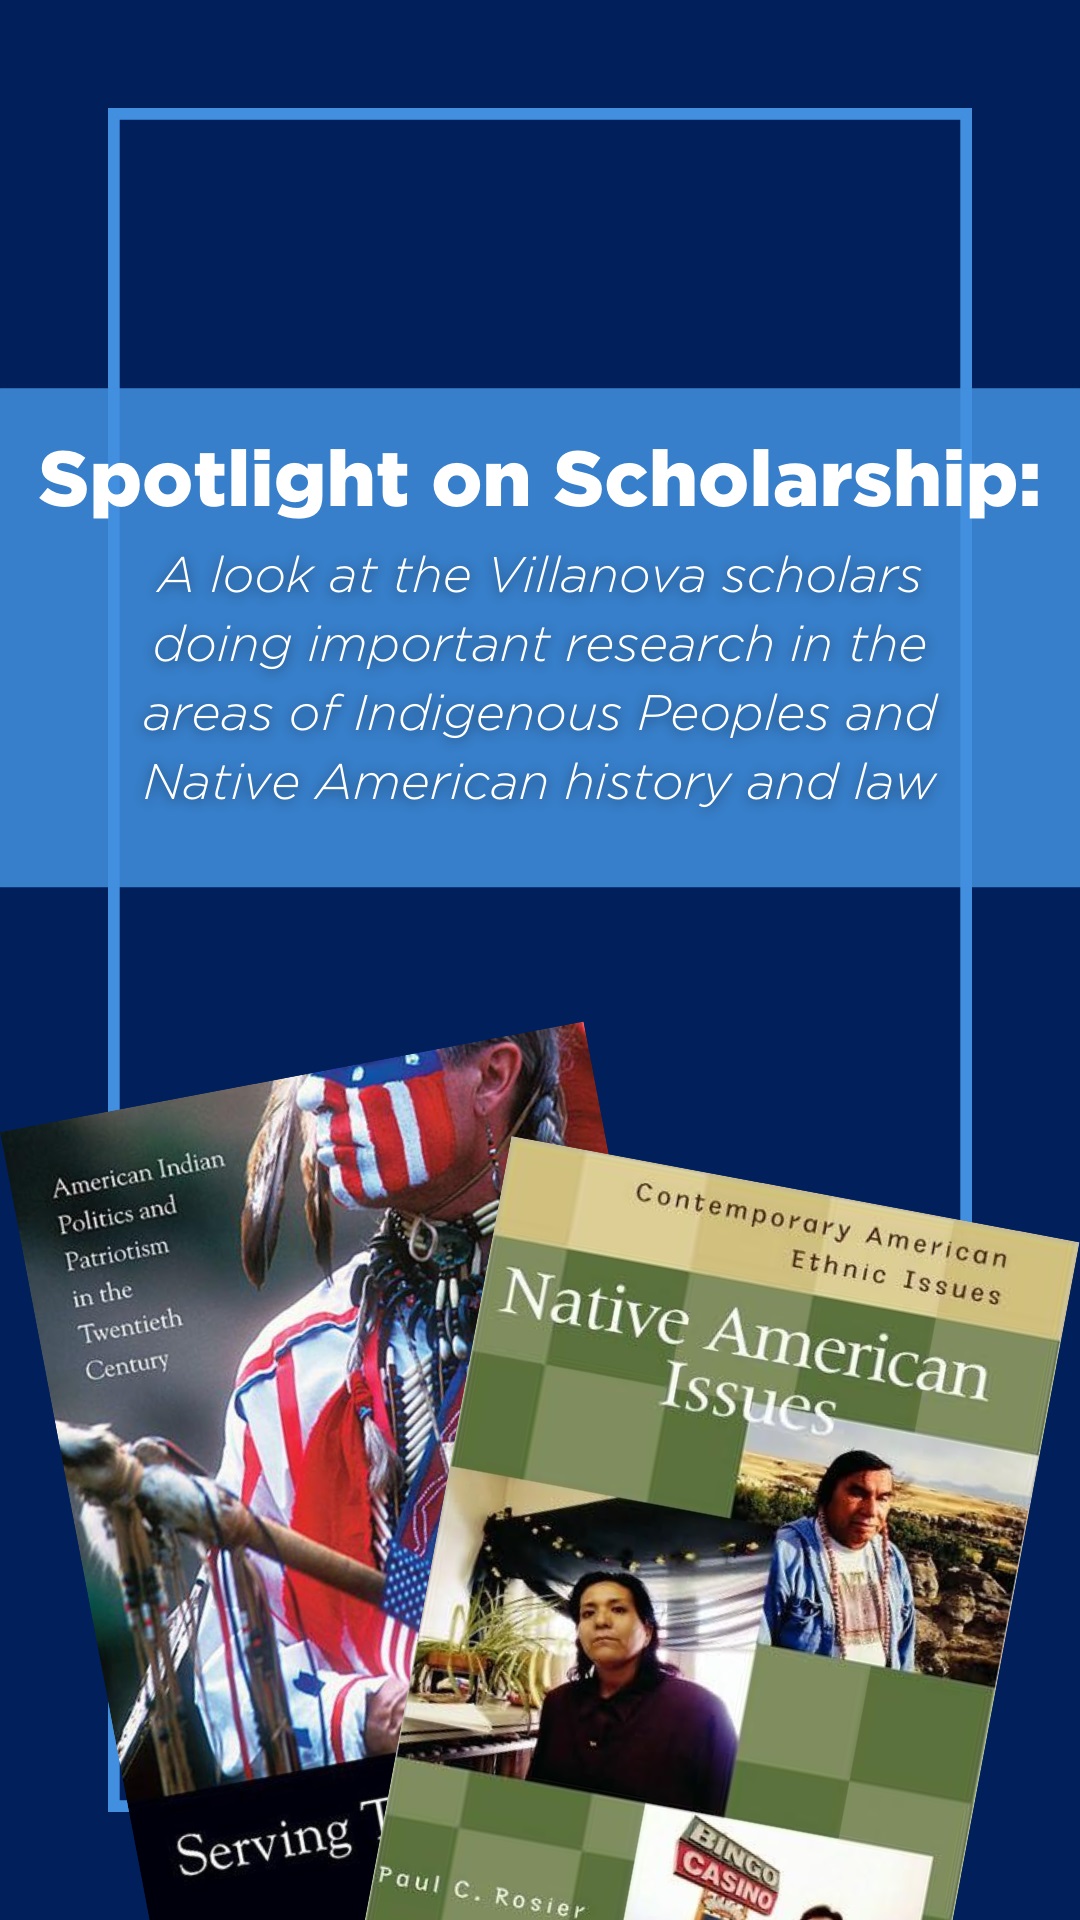 At Villanova University, the work of faculty scholars across several disciplines focuses on the areas of Indigenous studies, Native American history and law. 